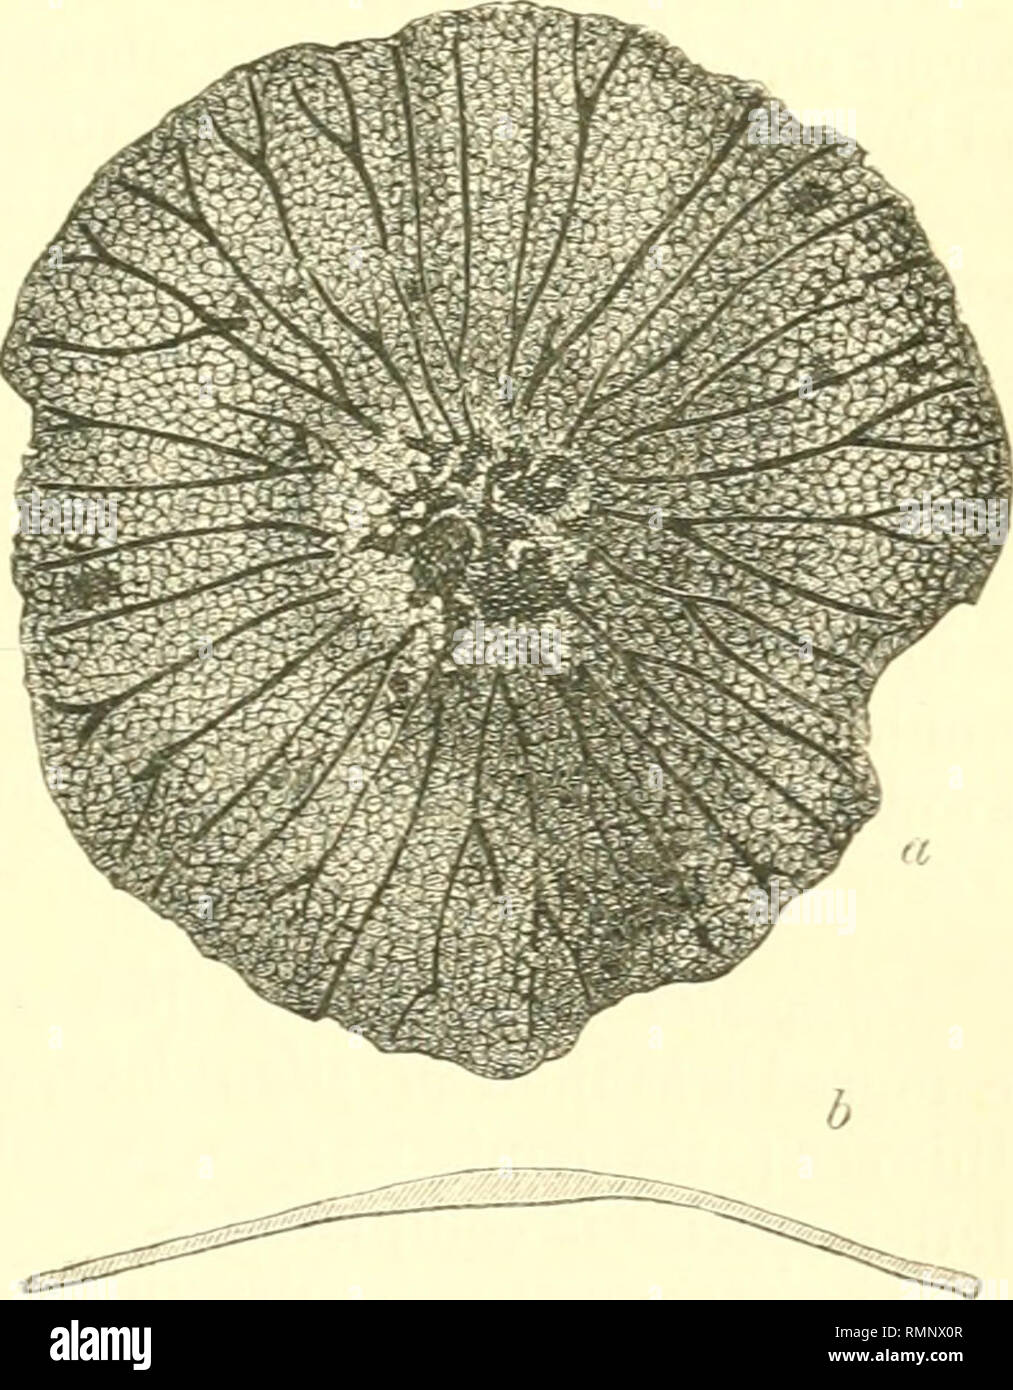 . The Annals and magazine of natural history; zoology, botany, and geology. Natural history; Zoology; Botany; Geology. Fig. 1.—MasoneUa planulata, n. sp. Fig-. %—Masone.Ua patelUformis, n. sp. Magnified 5 diameter-. MasoneUa planulata, n. sp. (Fig. 1.) Test thin, complanate, rounded or oval in outline; pre- senting (typically) a small central convexity about one third the diameter of the disk, nearly equally developed on the two lateral faces. Radial tubes numerous, from Ol to 0*2 millim. in diameter ; either simple or dividing into two or three branches; limbate externally; the open periphera Stock Photo